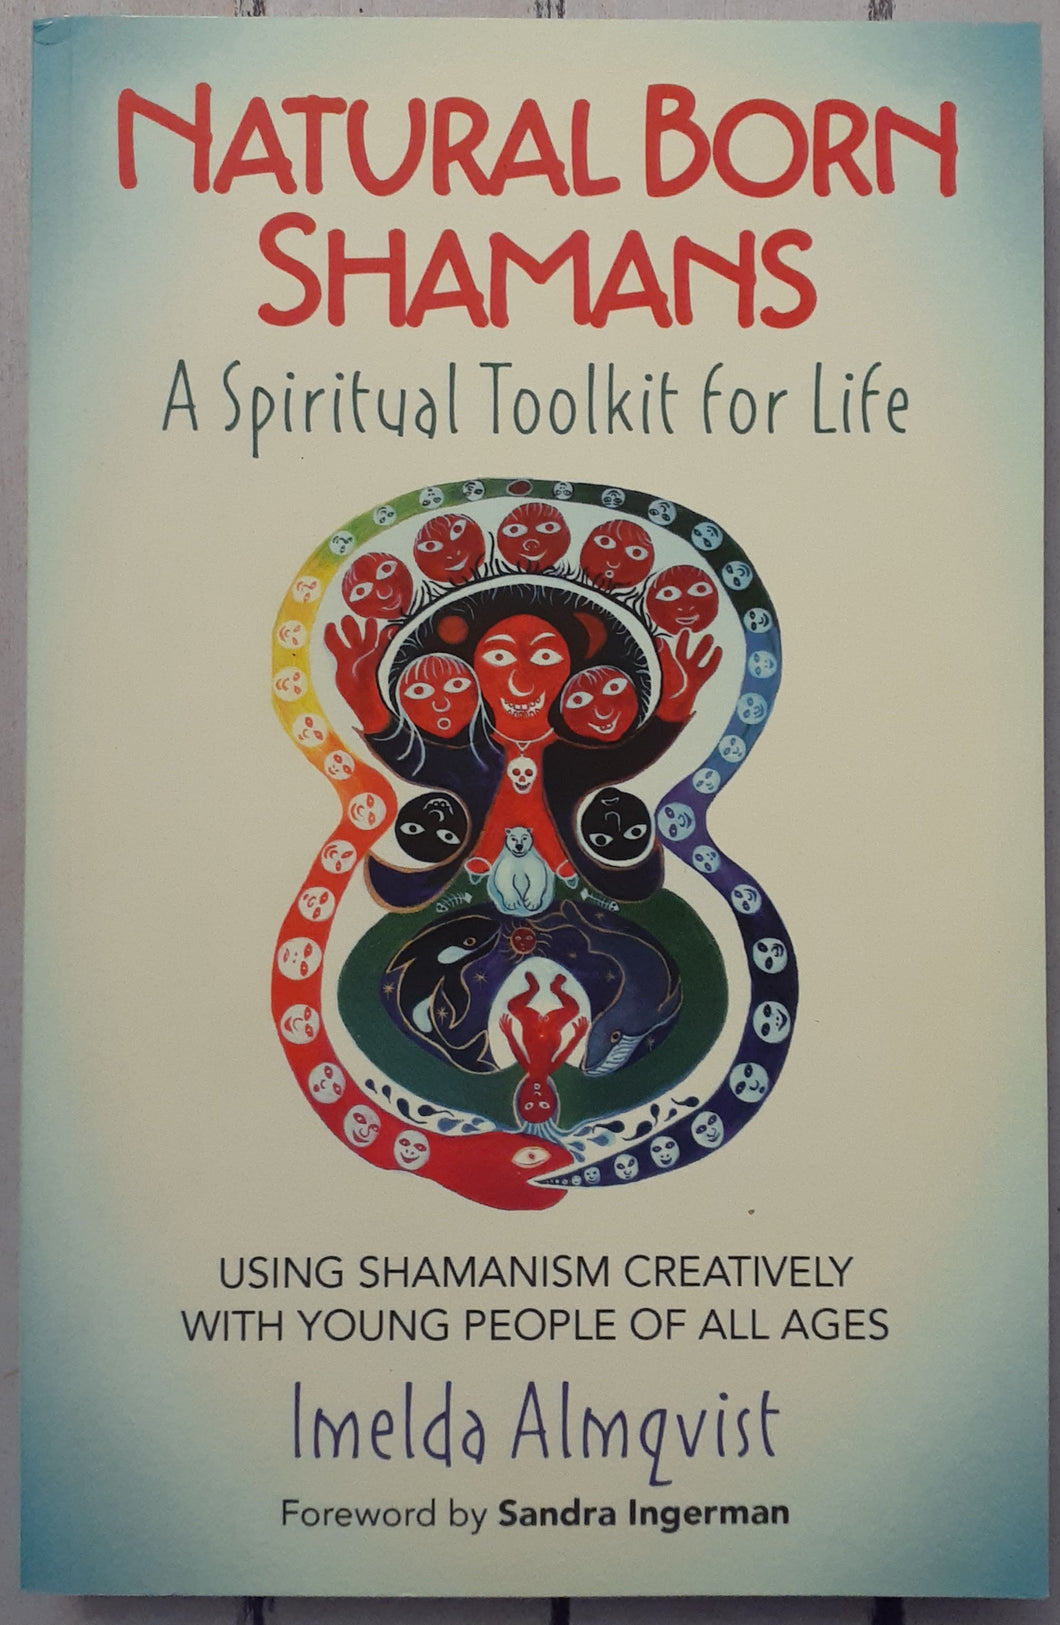 Natural Born Shamans - A Spiritual Toolkit for Life: Using Shamanism Creatively with Young People of All Ages